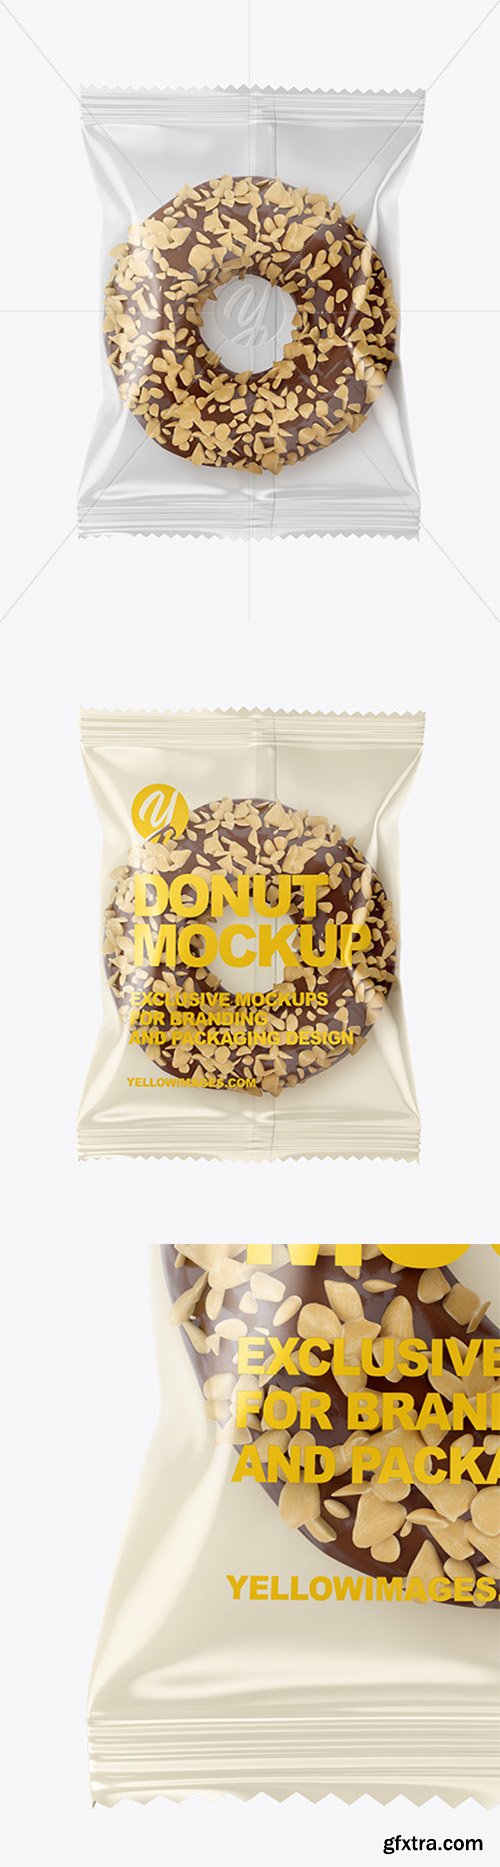 Plastic Bag With Chocolate Glazed Donut with Nut Crumbs Mockup 52624